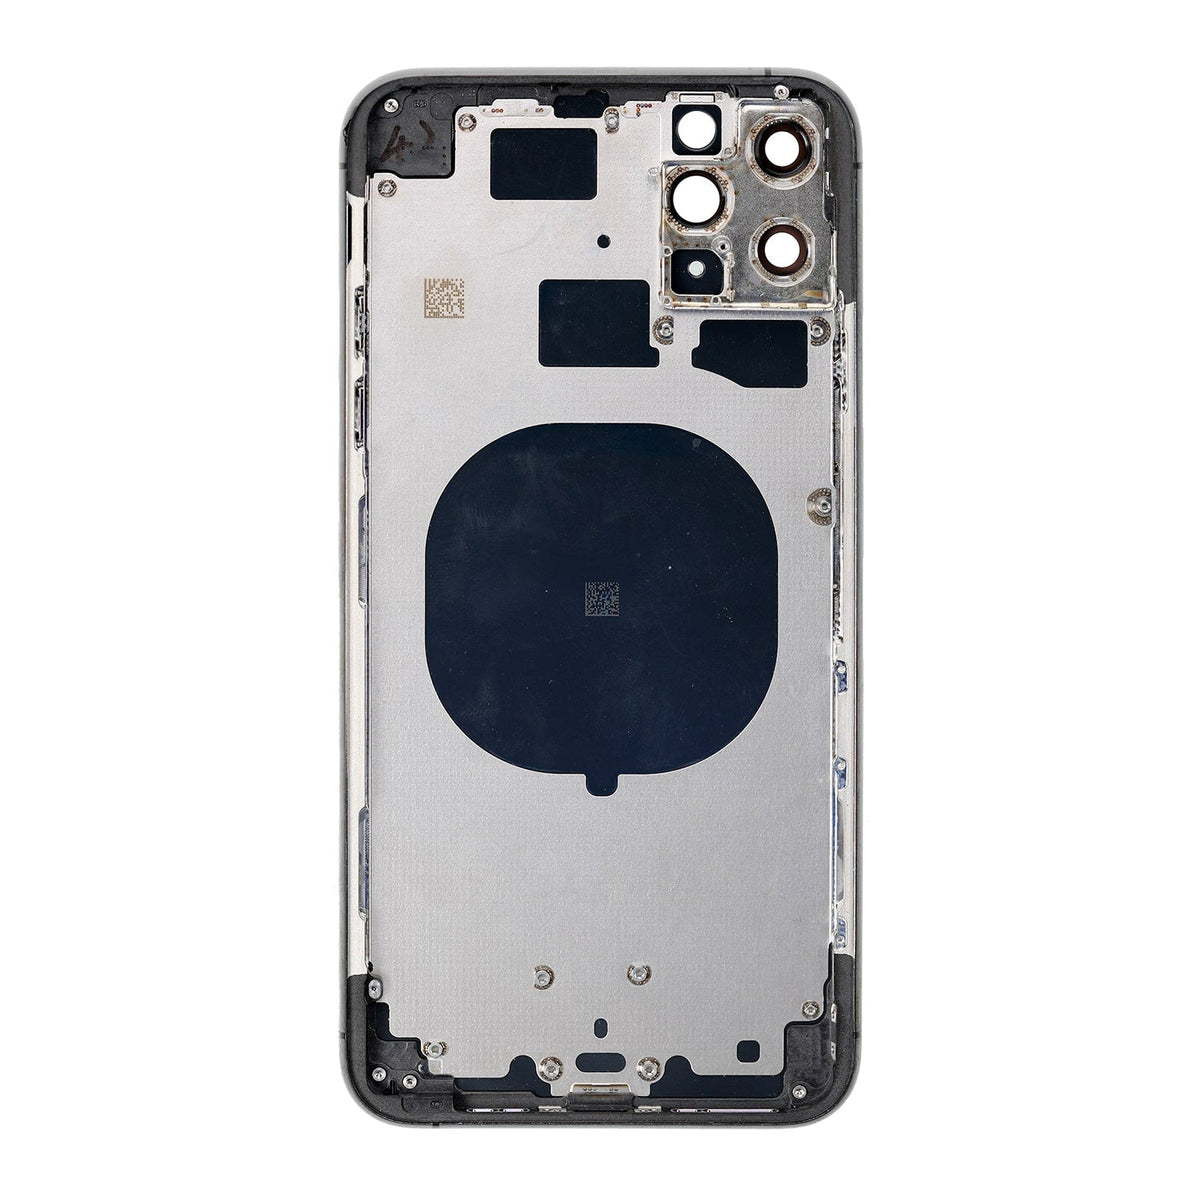 REAR HOUSING WITH FRAME - SPACE GRAY FOR IPHONE 11 PRO MAX